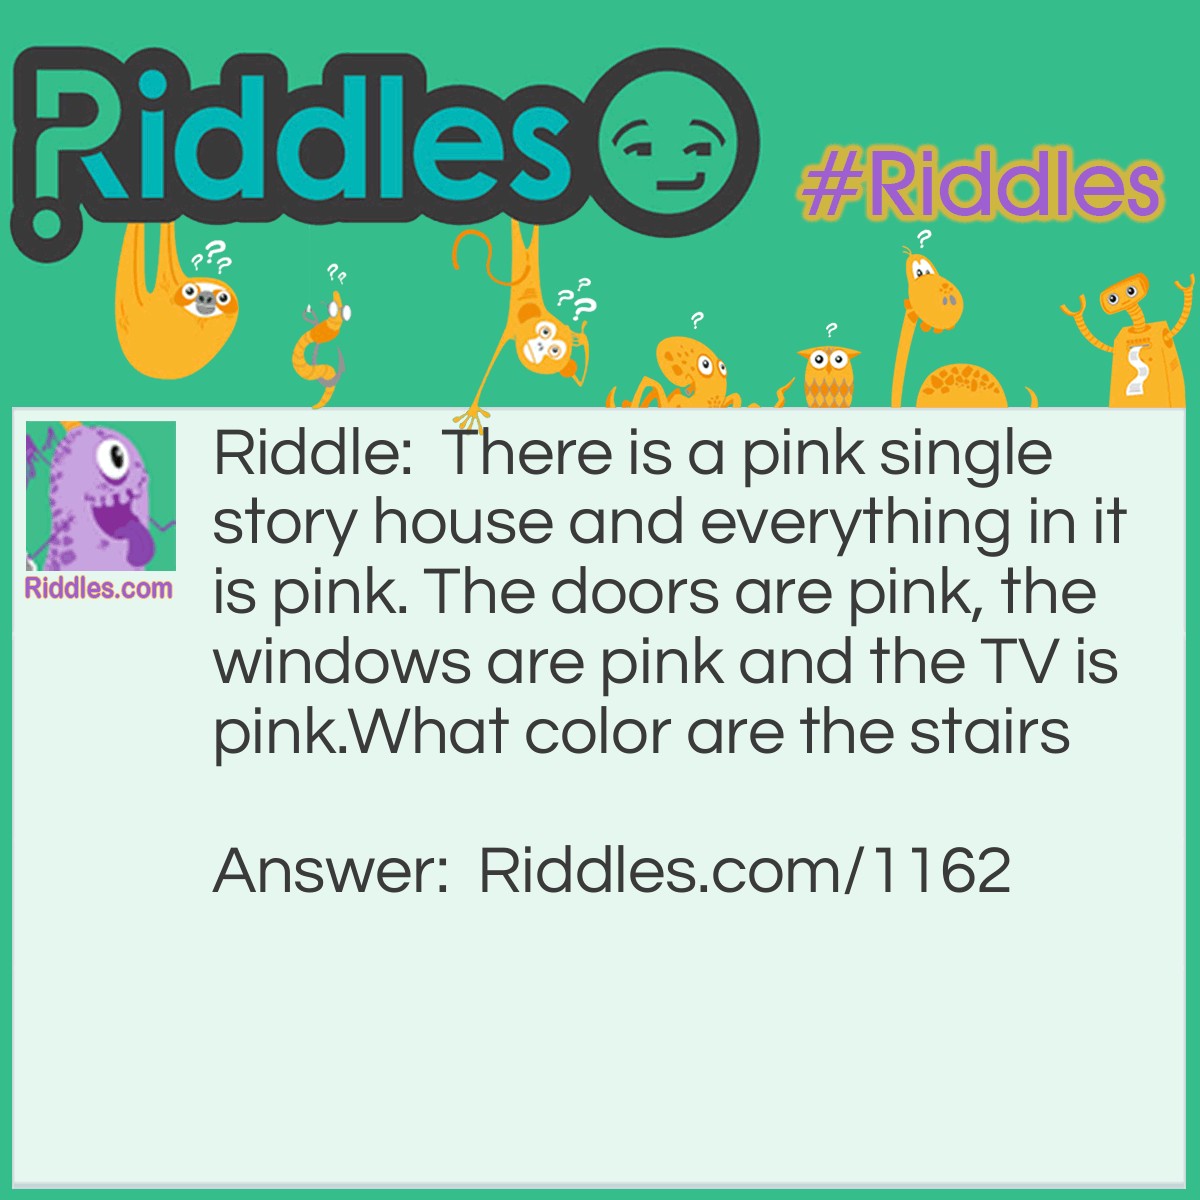 Riddle: There is a pink single-story house and everything in it is pink. The doors are pink, the windows are pink and the TV is pink. What color are the stairs? Answer: There are no stairs in a single story house.